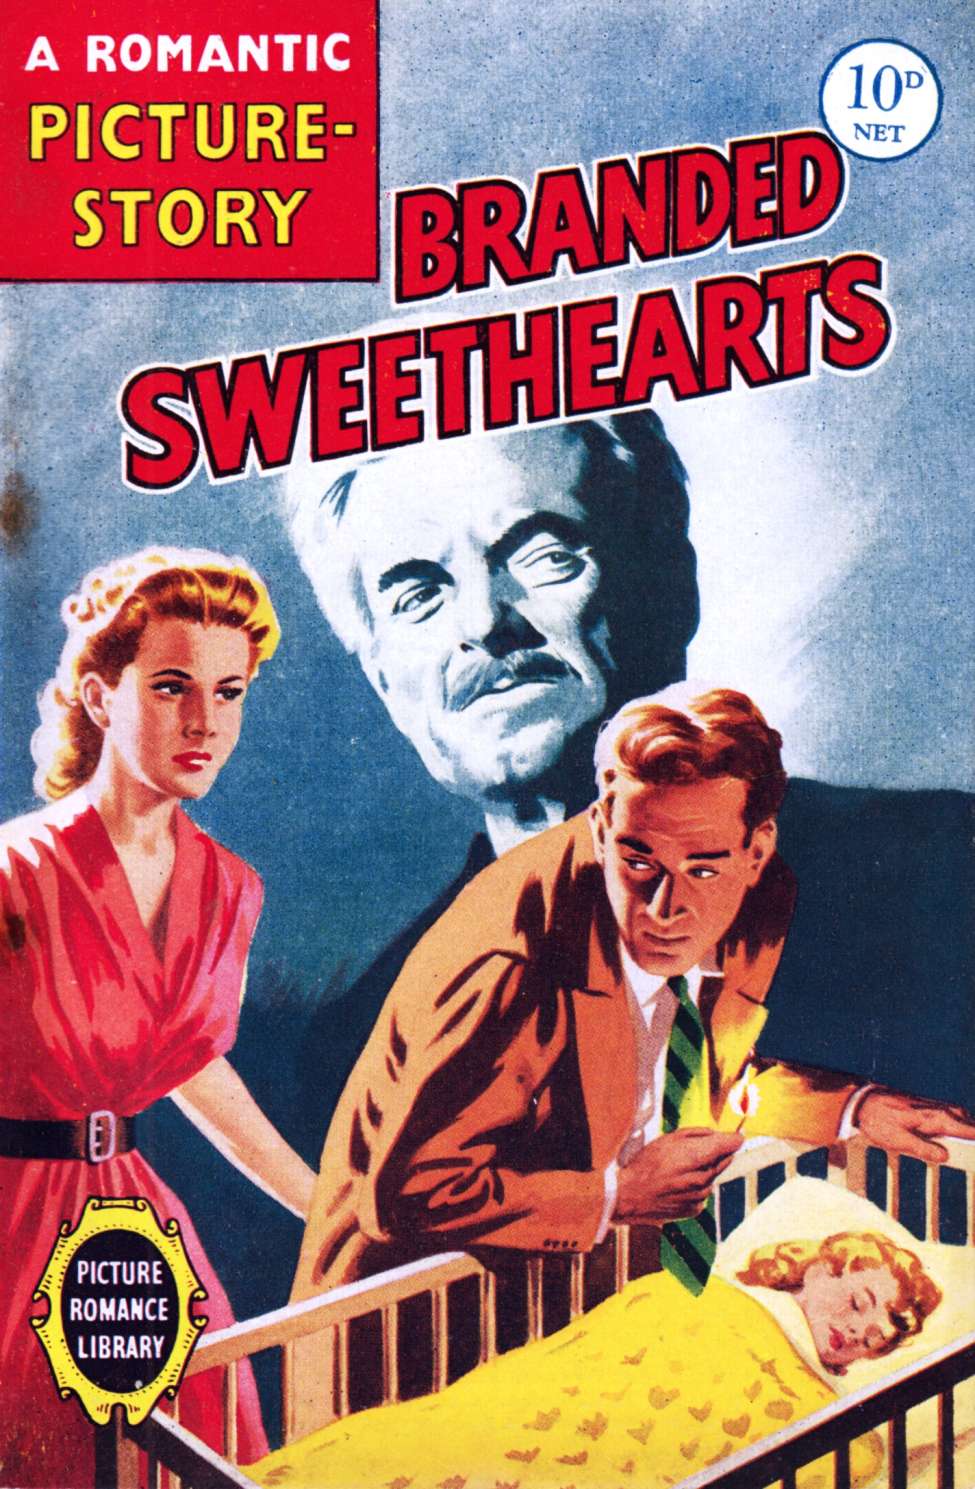 Book Cover For Picture Romance Library 32 - Branded Sweethearts